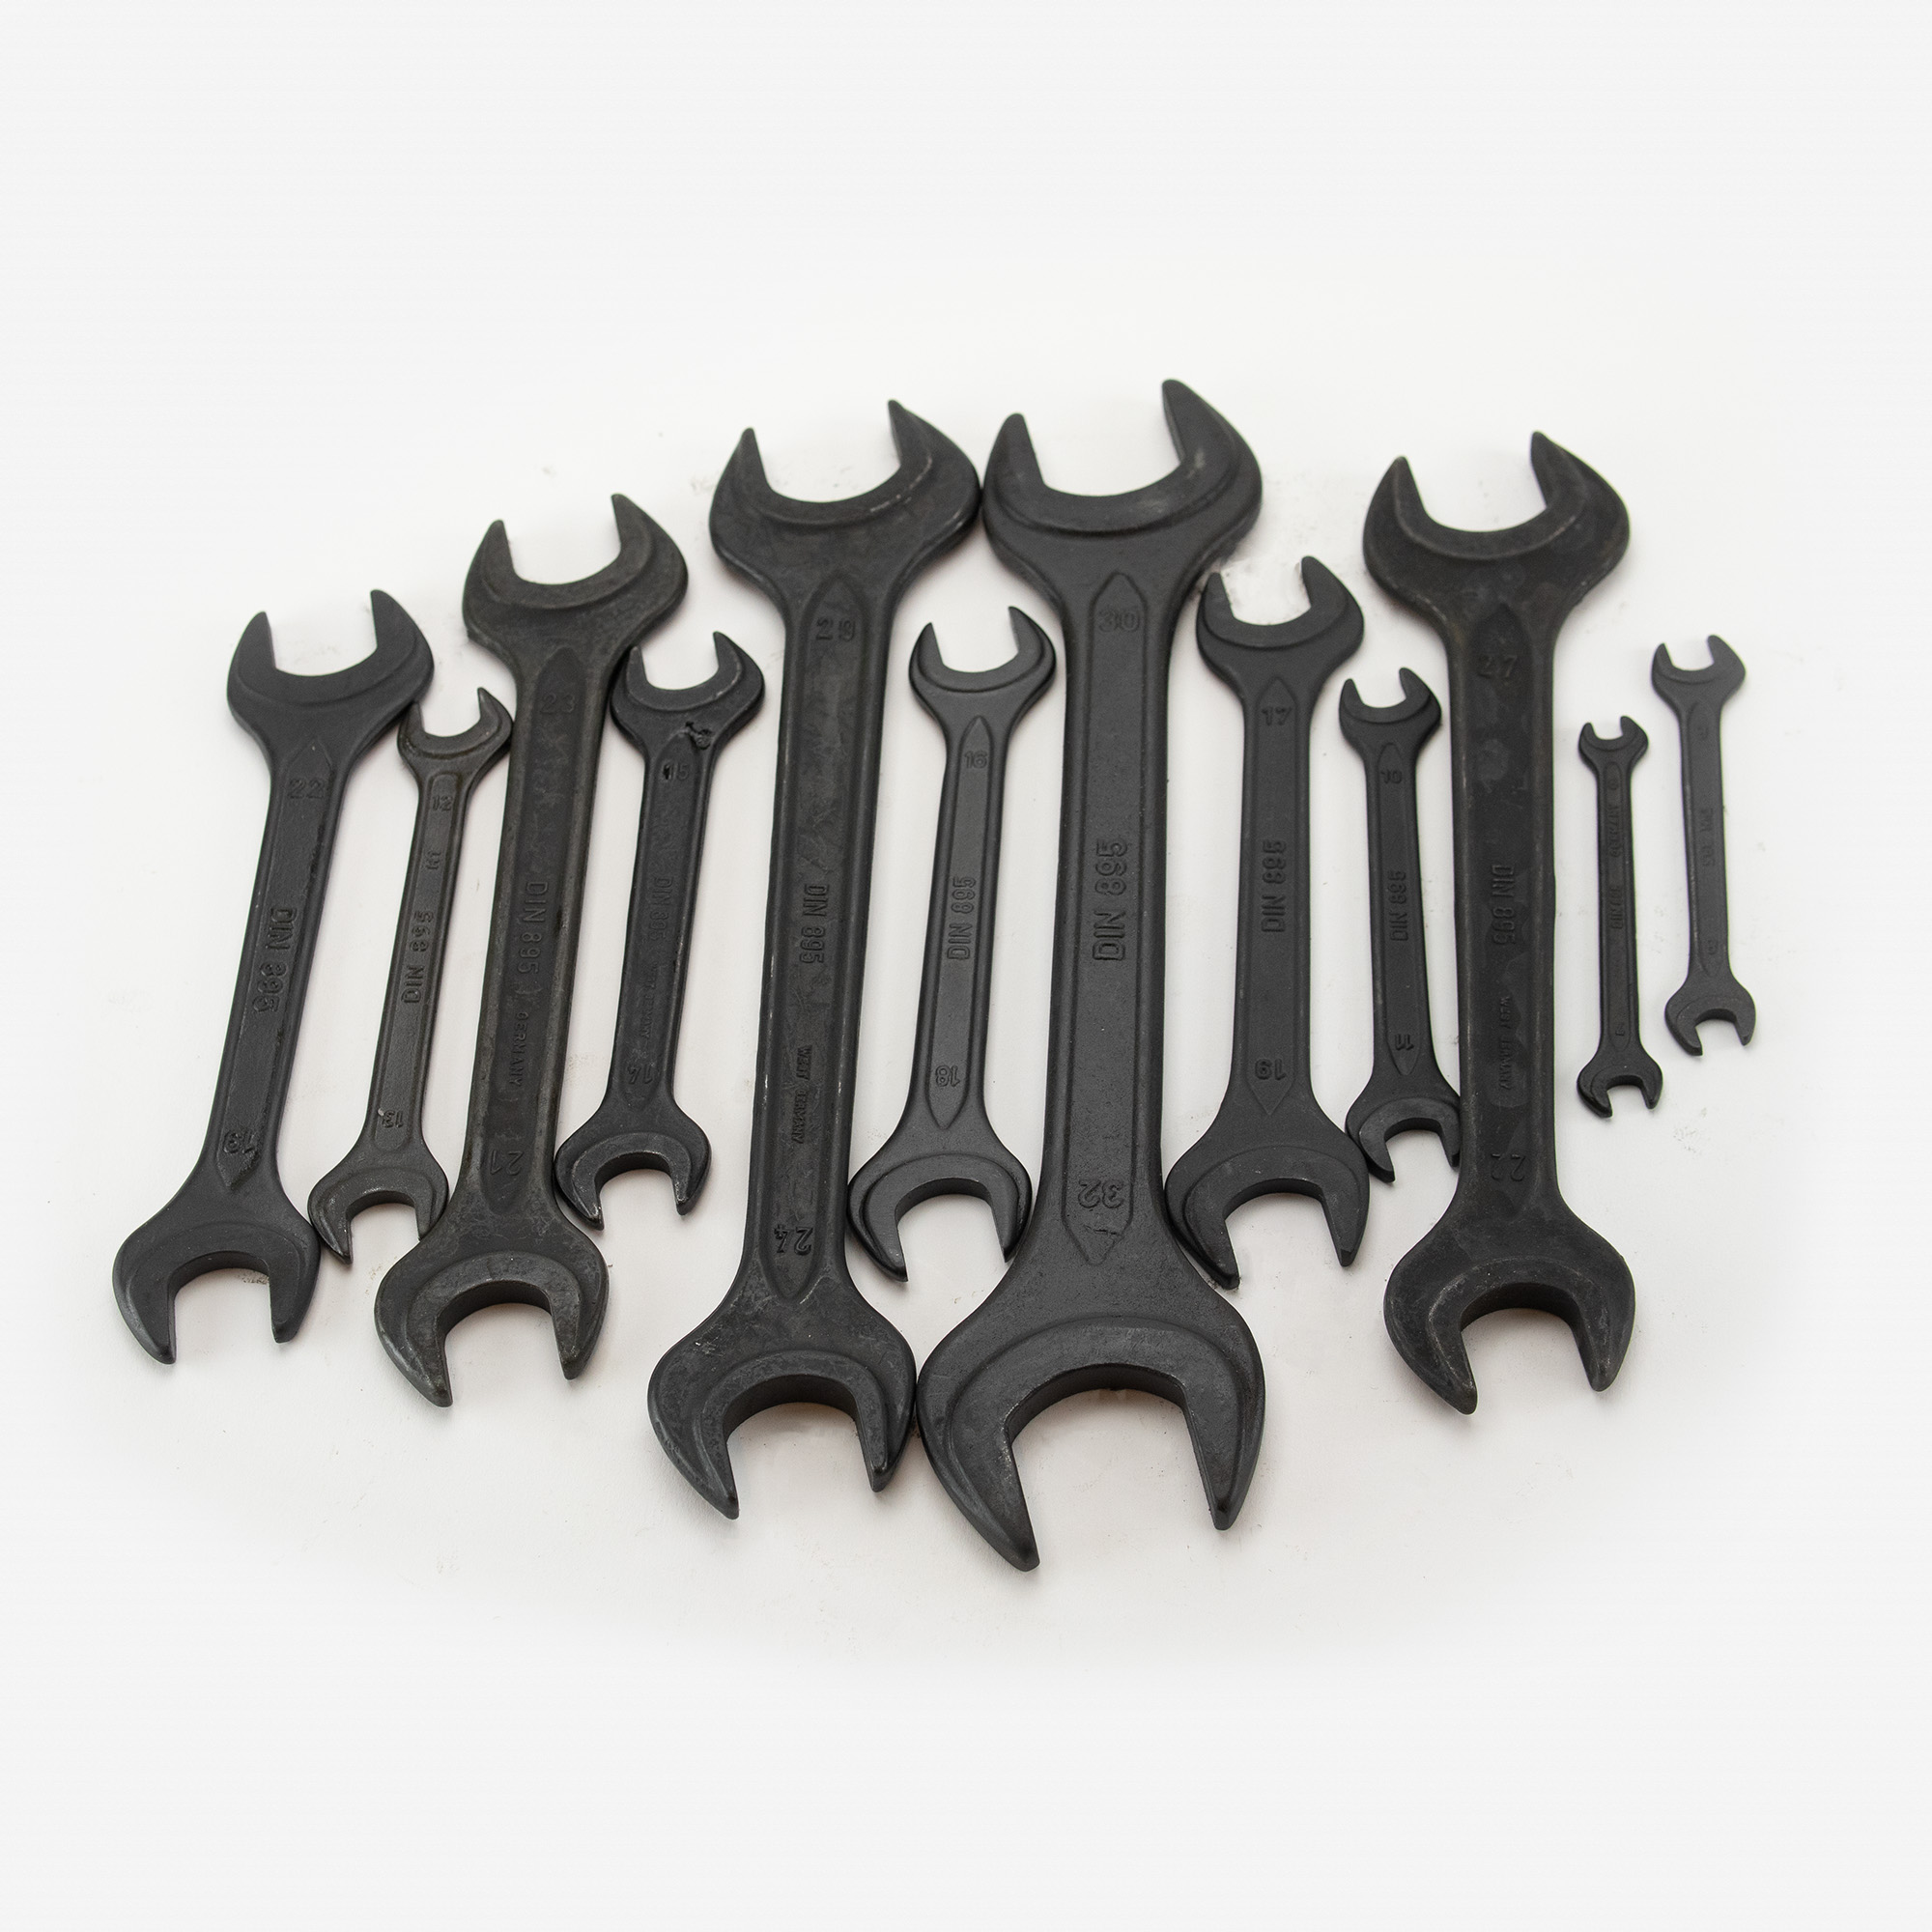 Heyco 8959470 Metric 6-32mm Open End Wrench Set, 12 Pieces (HY8959470) - KC Tool